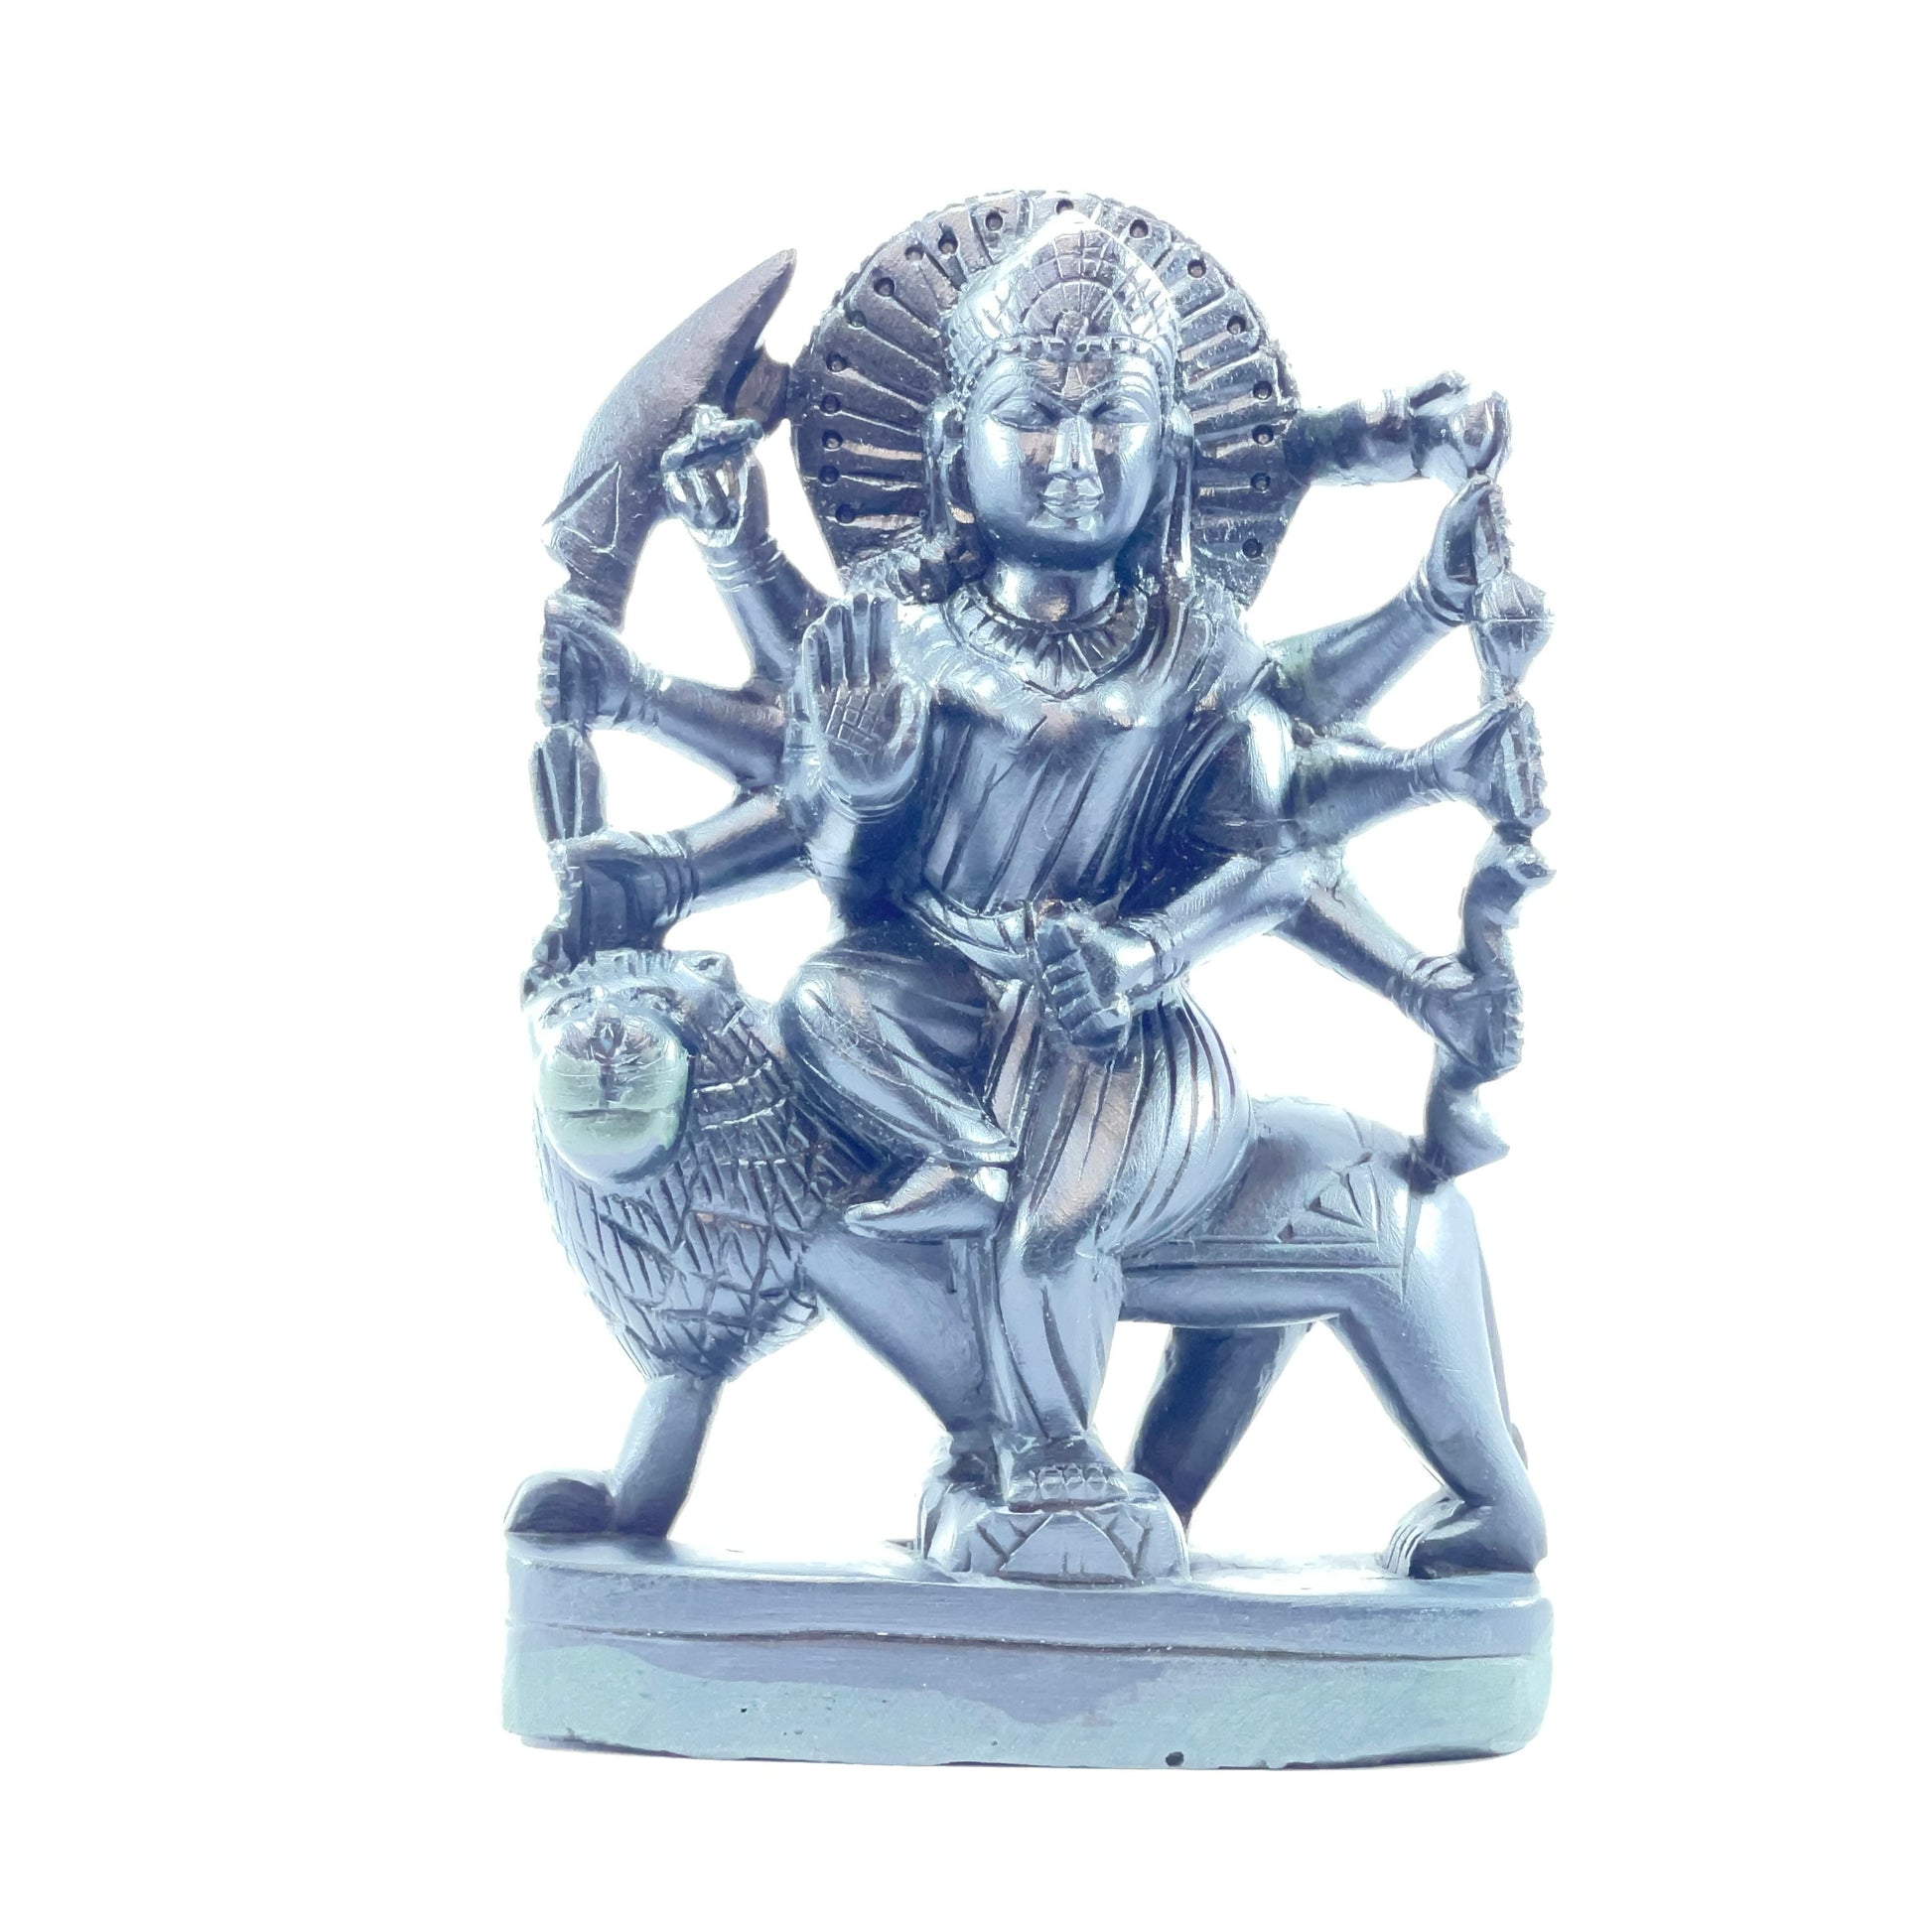 Handcarved Durga Maa Statue Made of Natural Occurring Black Stone